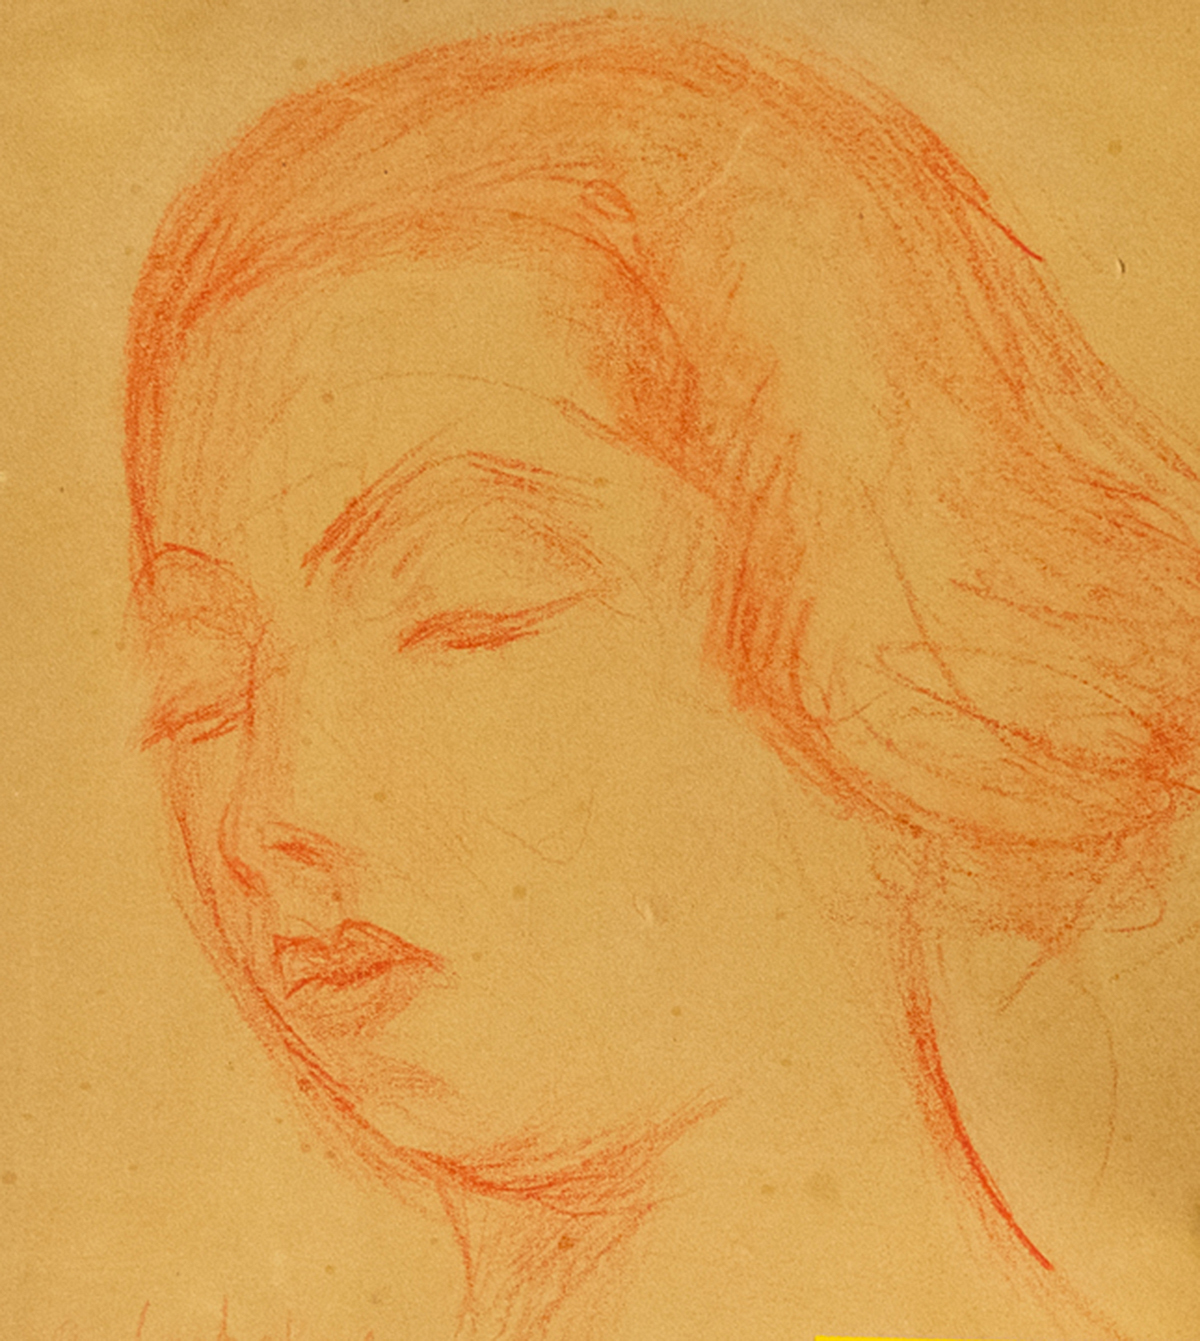 A sketch of a woman's profile with eyes closed, on yellowish paper using red hues.